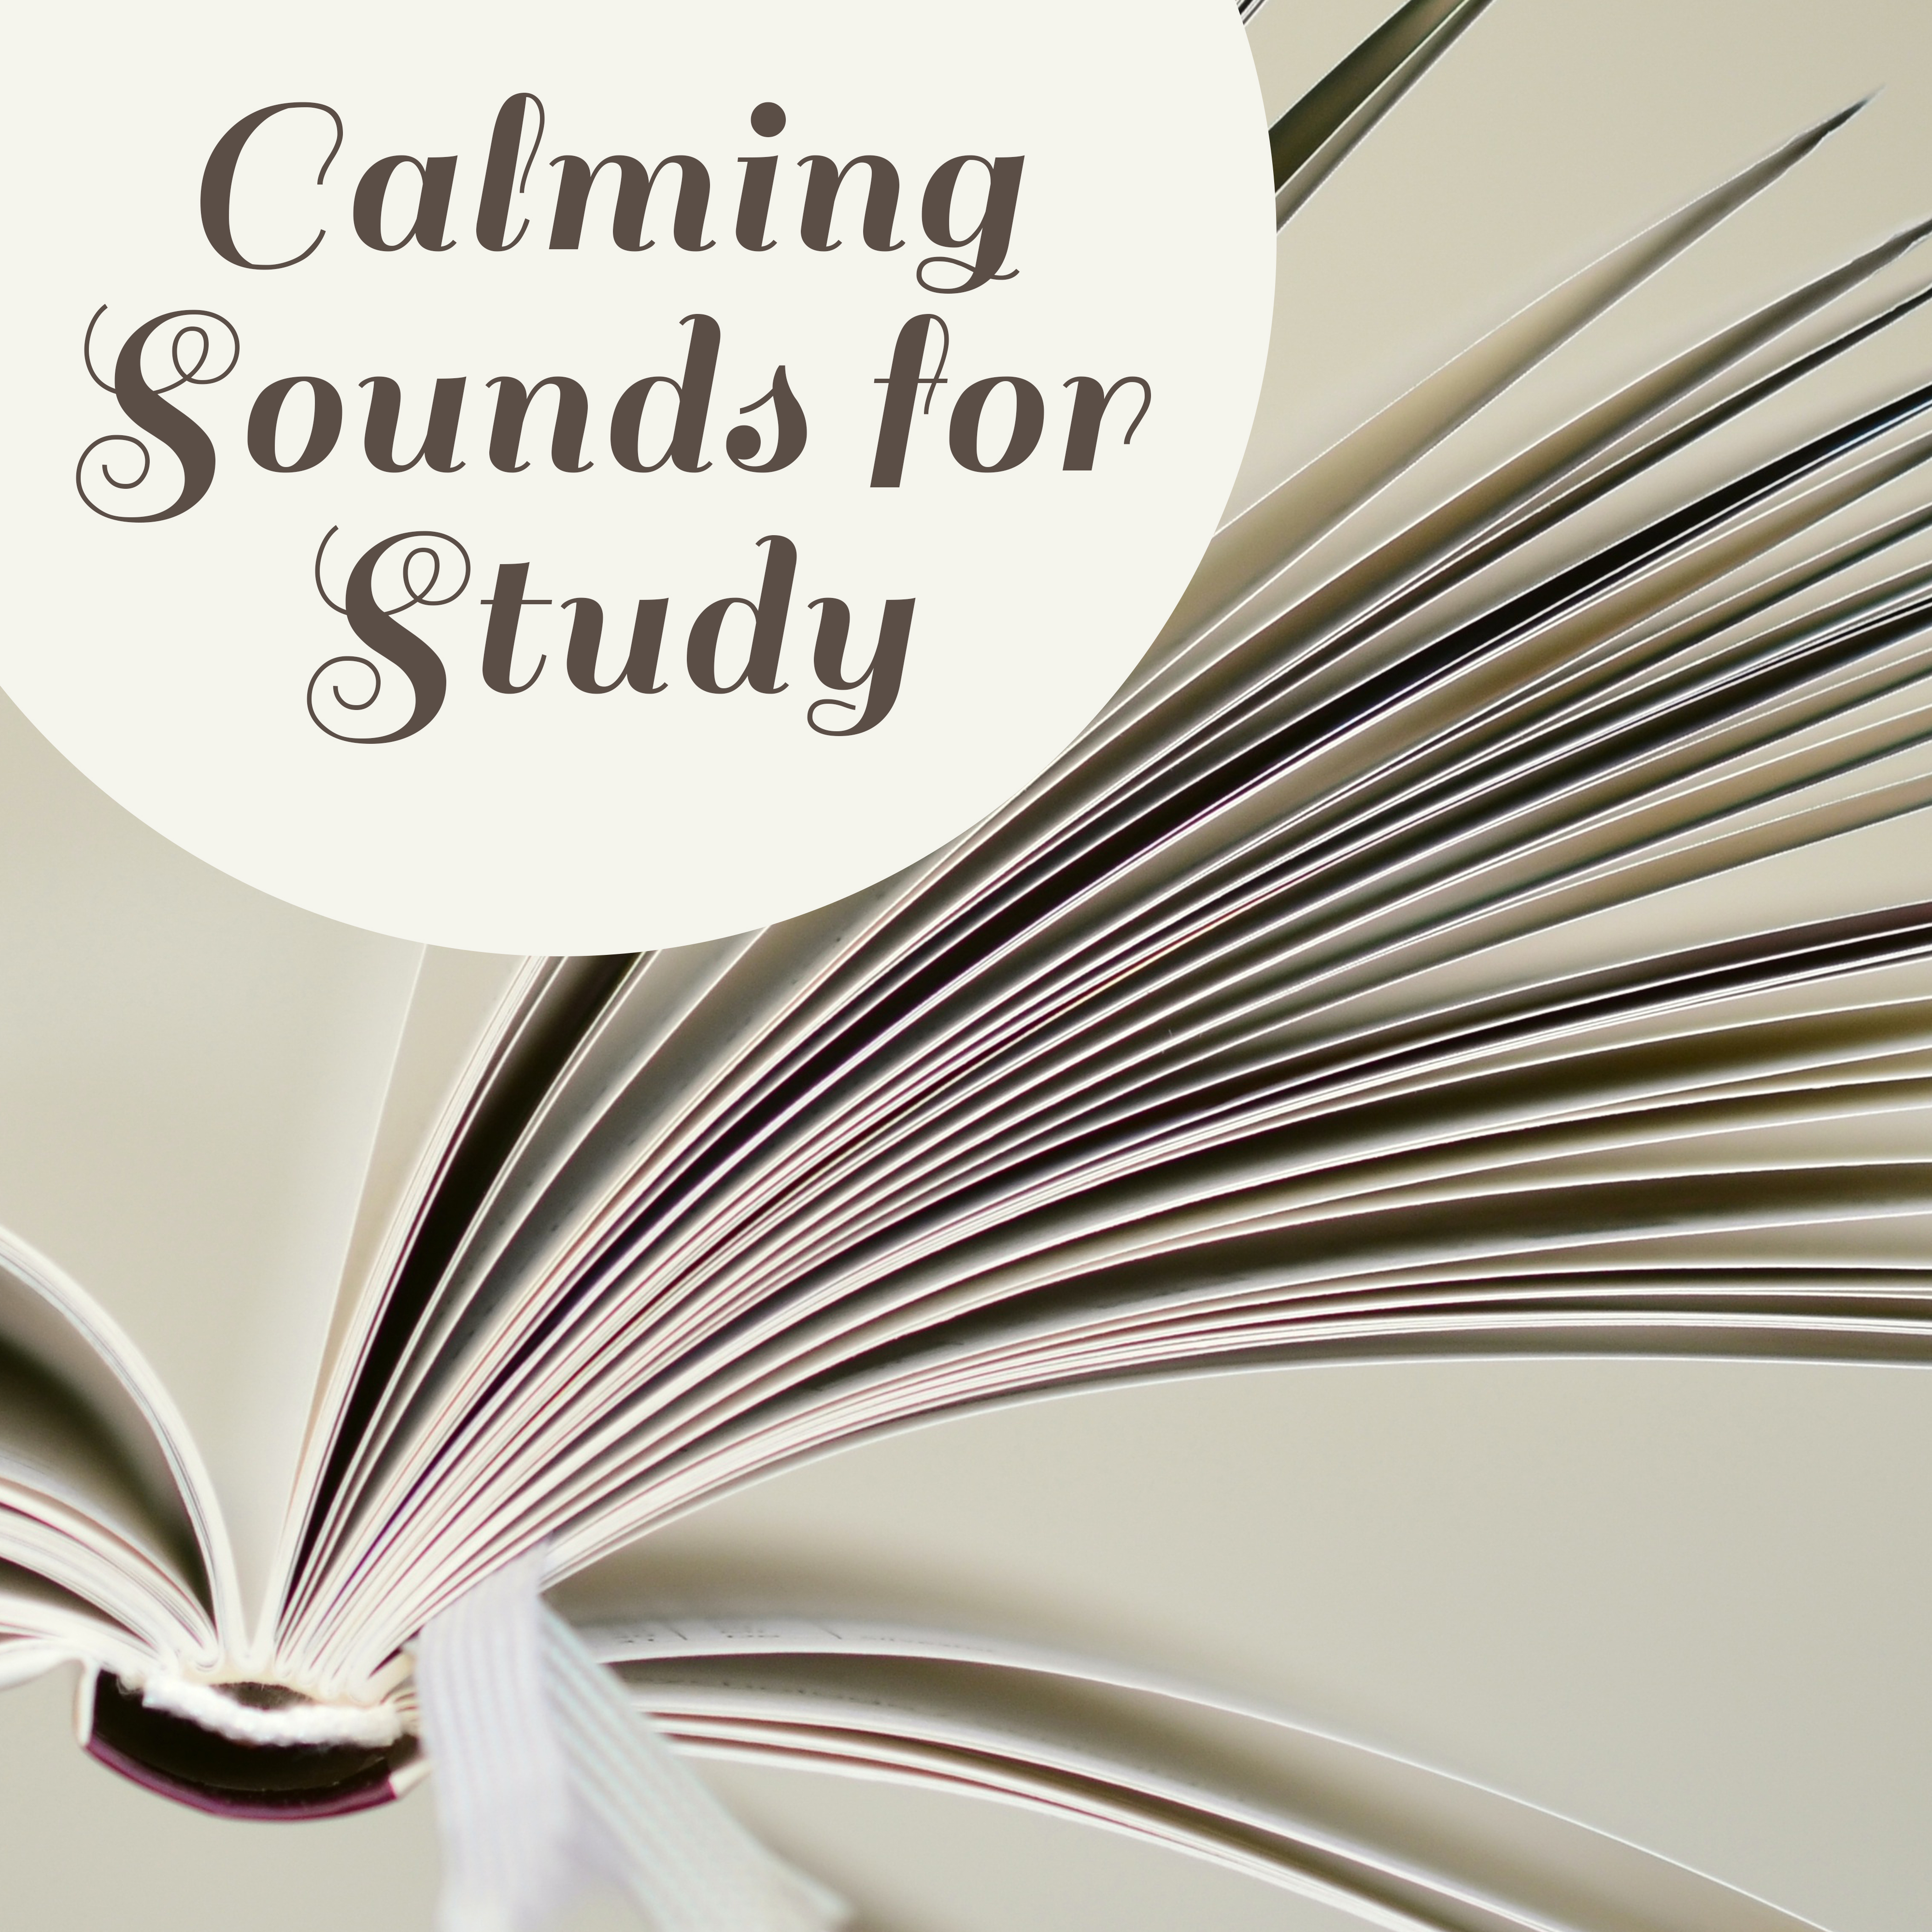 Calming Sounds for Study – Music for Learning, Deep Focus, Stress Relief, Nature Sounds Help Pass Exam, Clear Mind